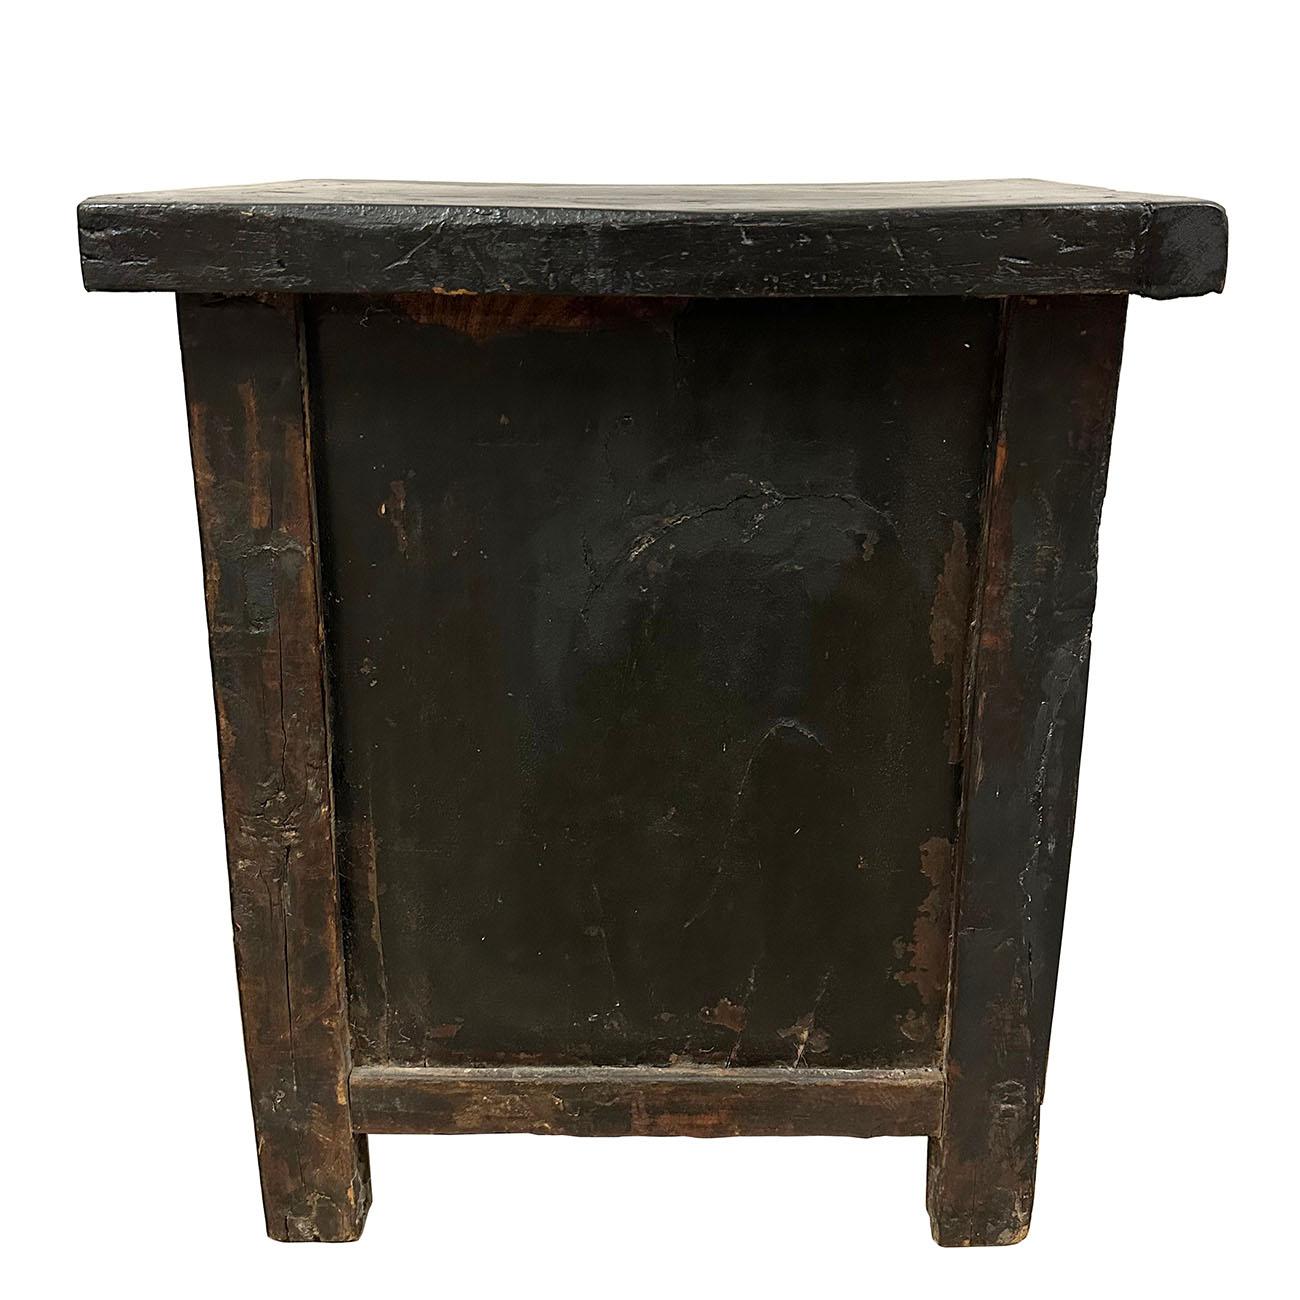 Chinese Late Qing Dynasty Bedside Wooden Cabinet with Period Painting Art Works For Sale 2